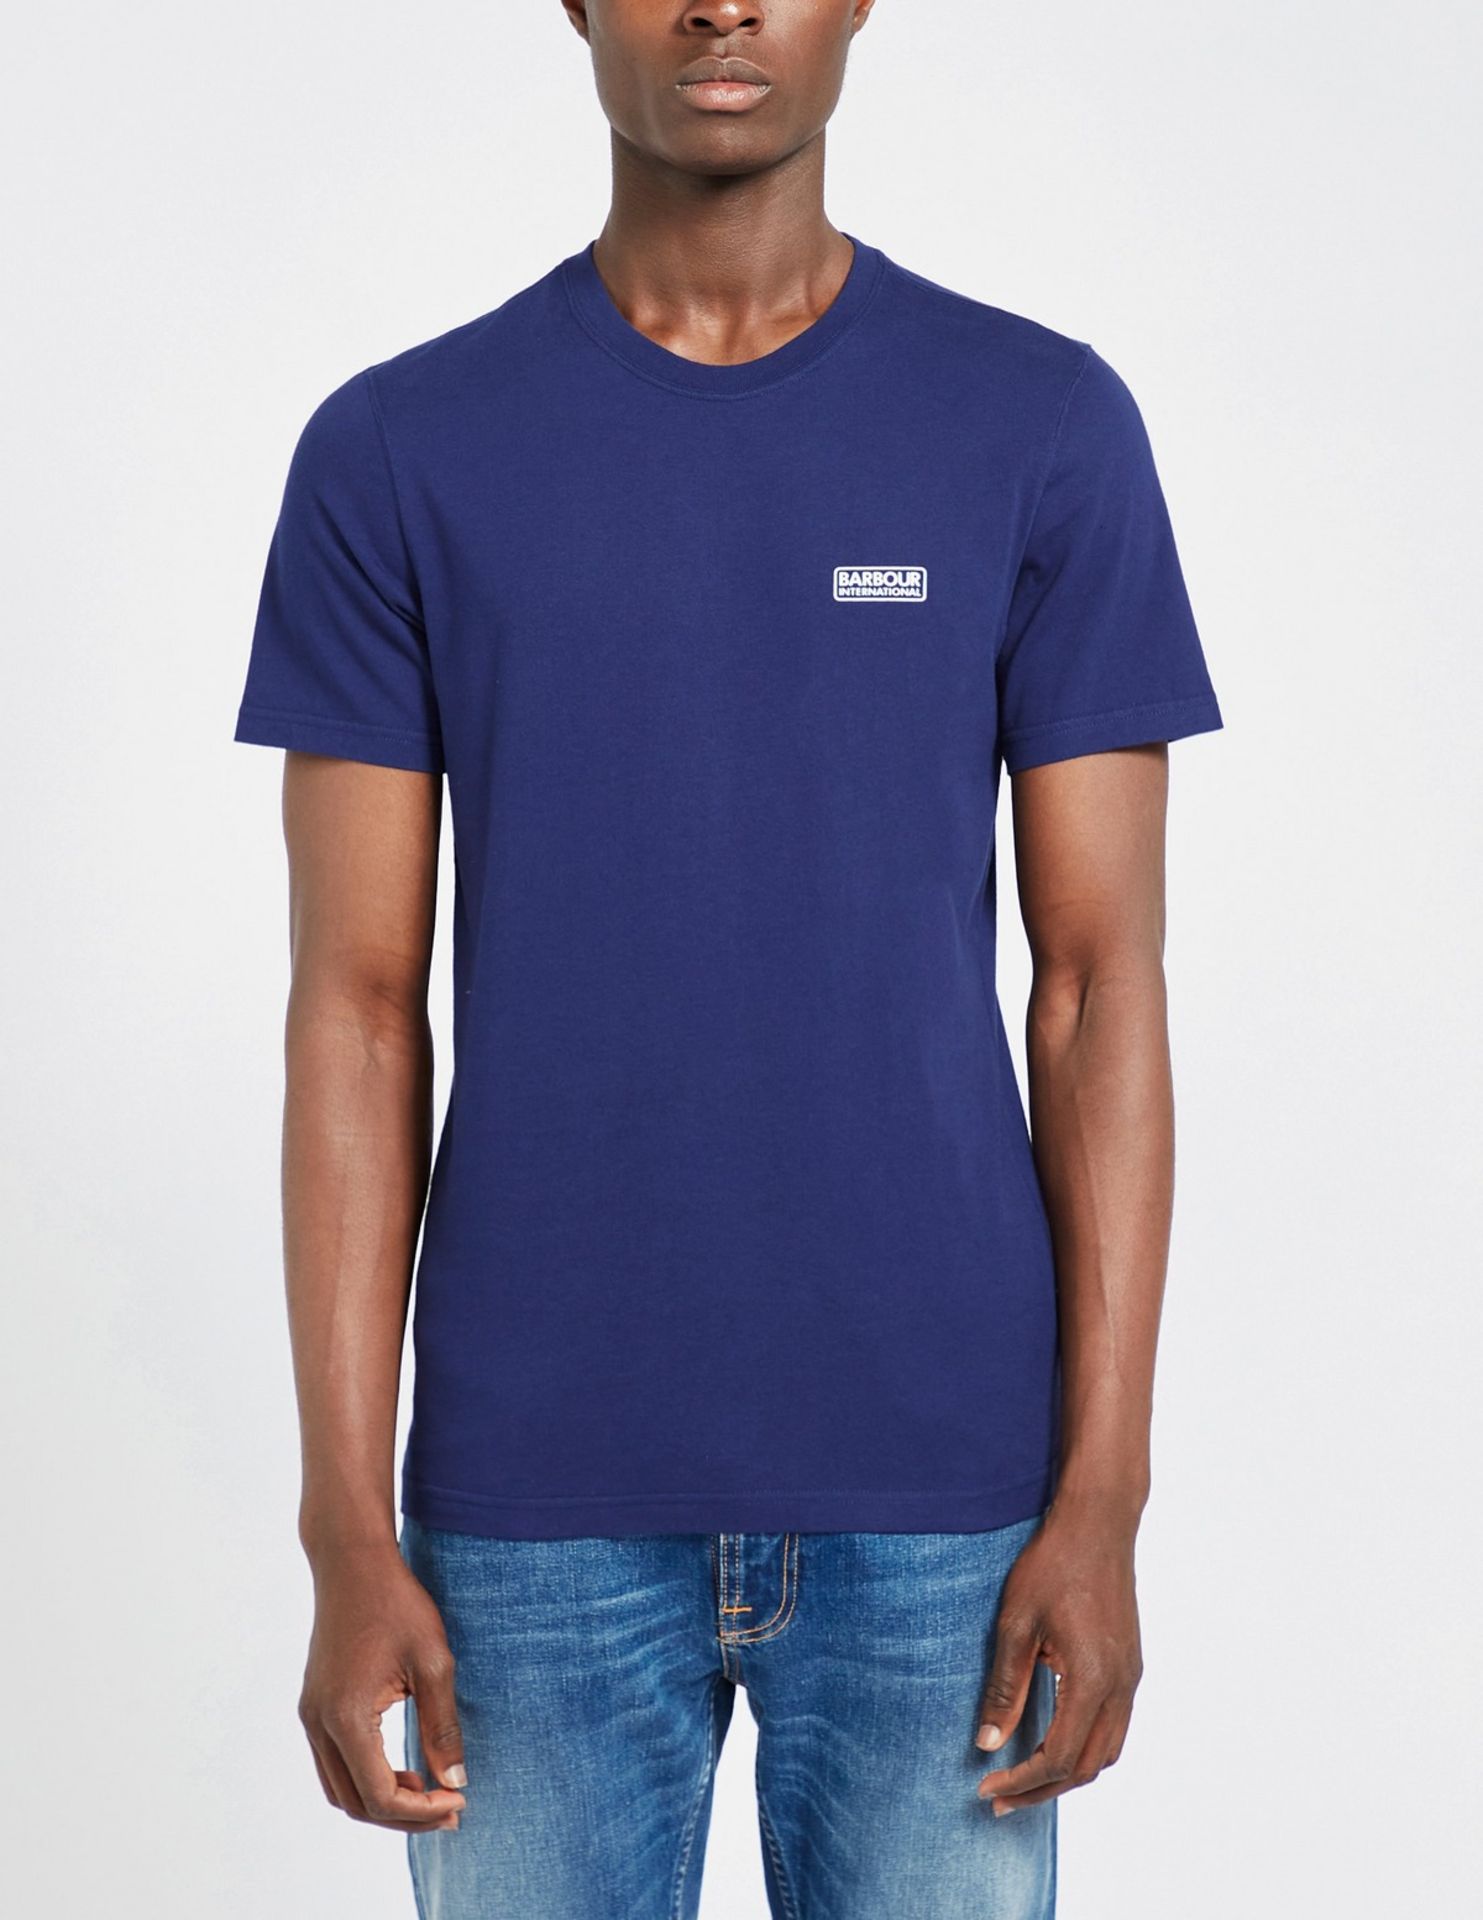 BRAND NEW BARBOUR INTL SMALL LOGO TEE NEEL BLUE SIZE XL RRP £40 - 2